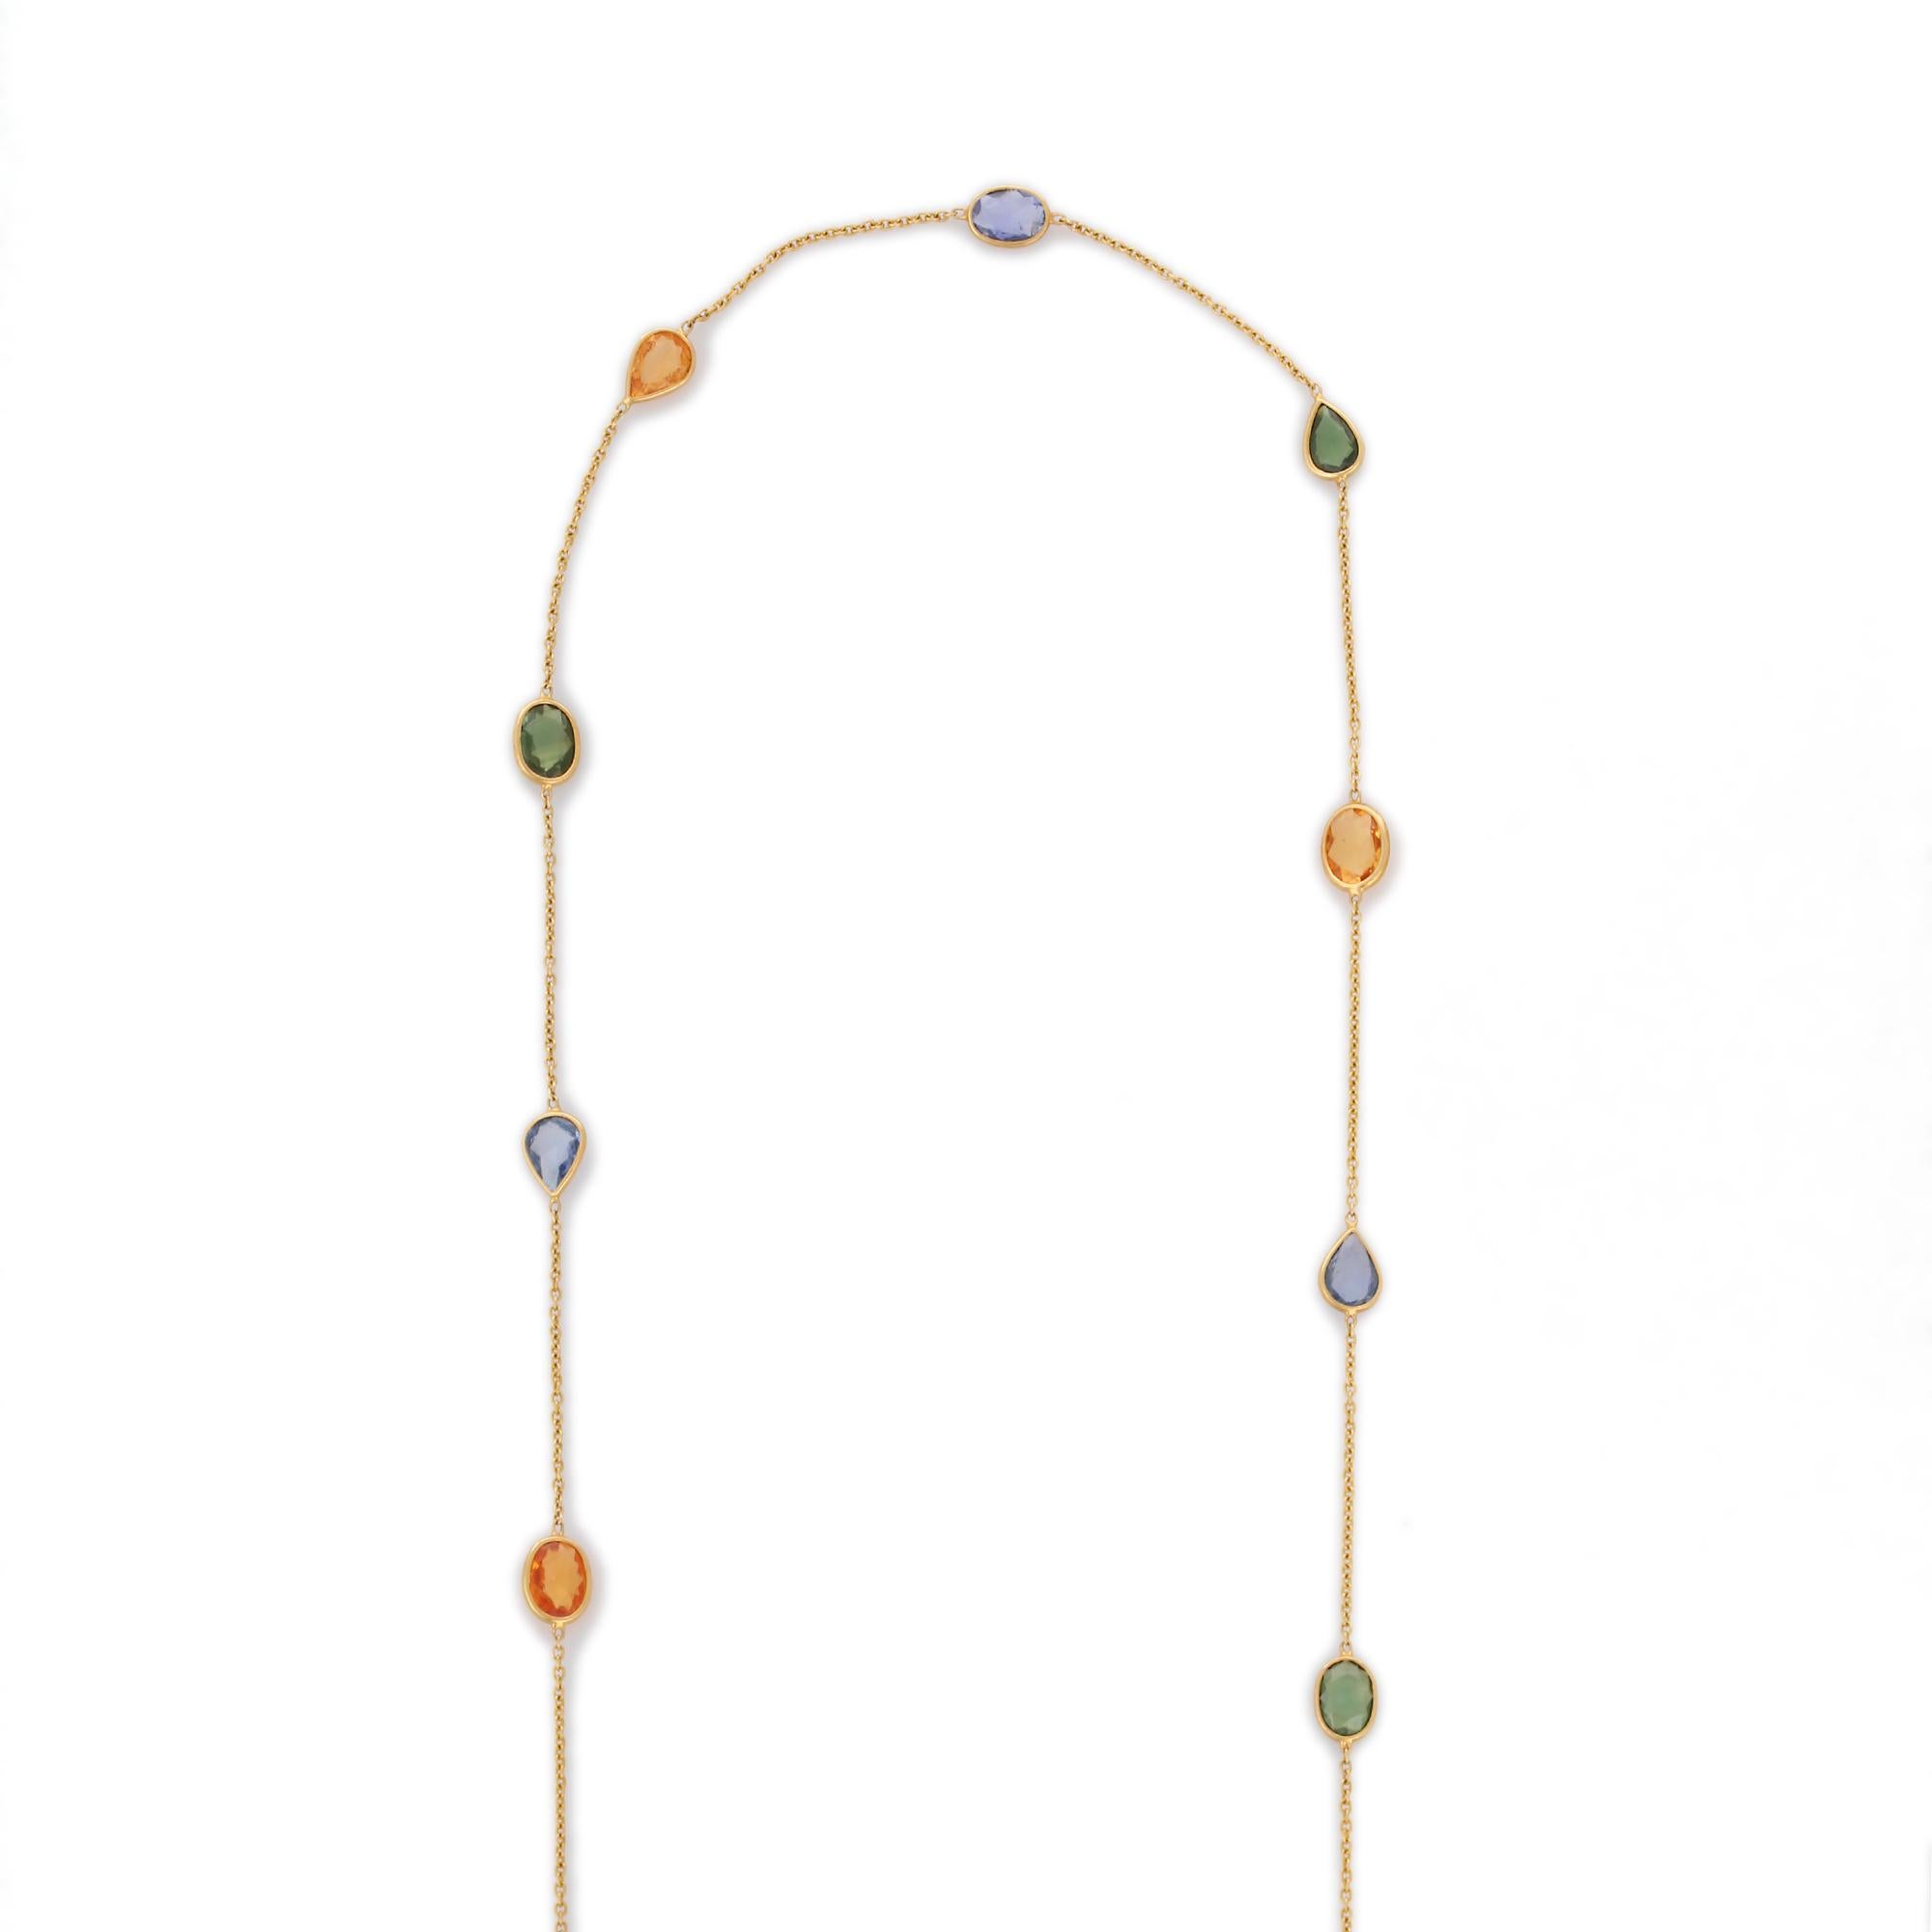 Multi Sapphire Chain Necklace in 18K Gold studded with oval and pear cut multi sapphire gemstones.
Accessorize your look with this elegant multi sapphire chain necklace. This stunning piece of jewelry instantly elevates a casual look or dressy